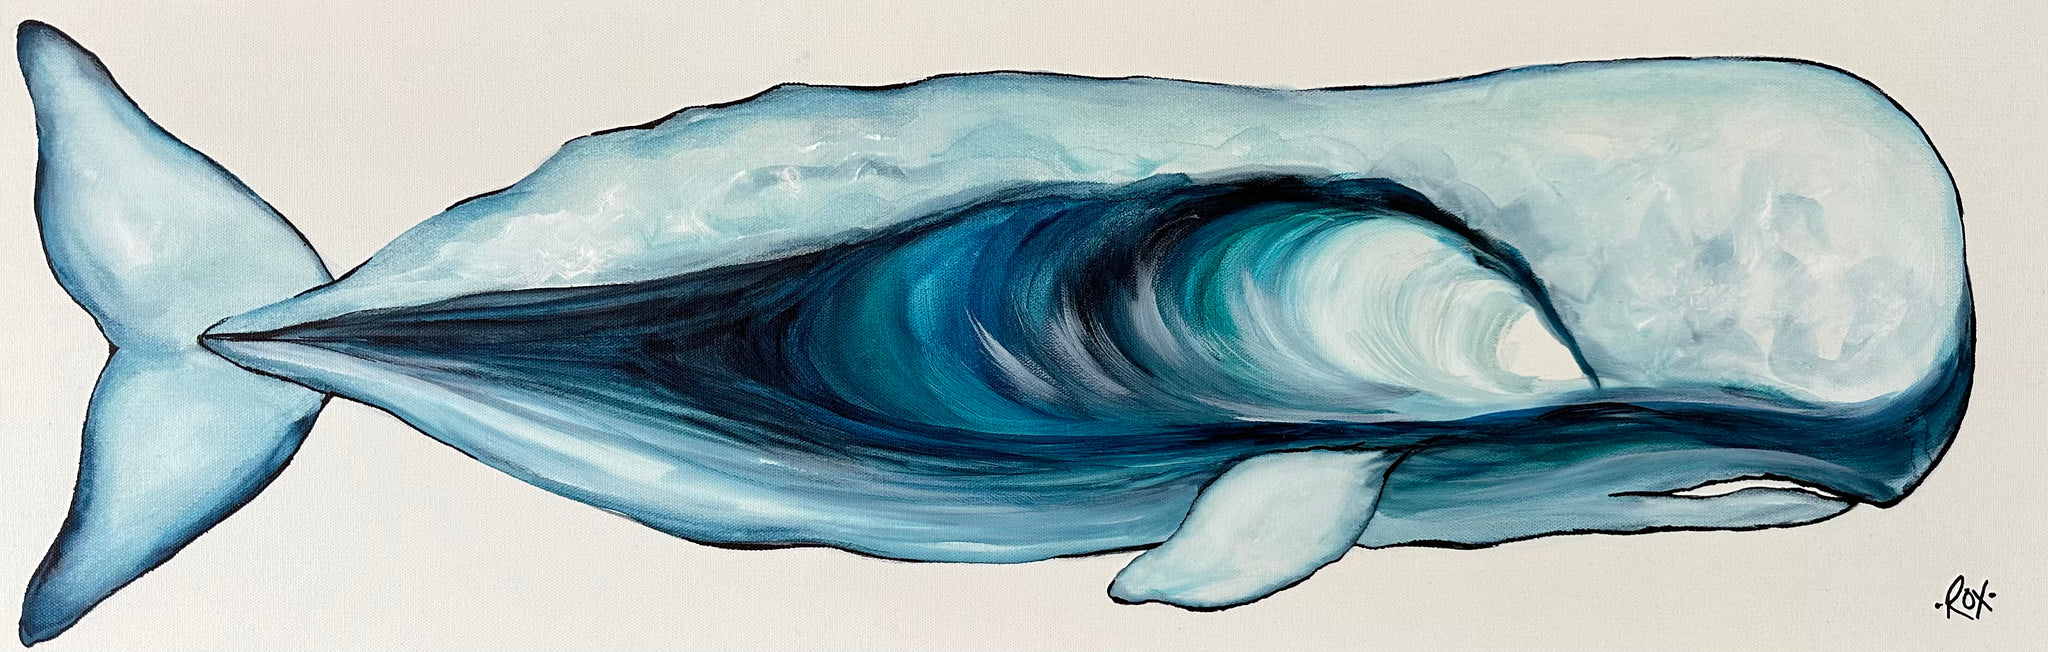 Large Wave Whale